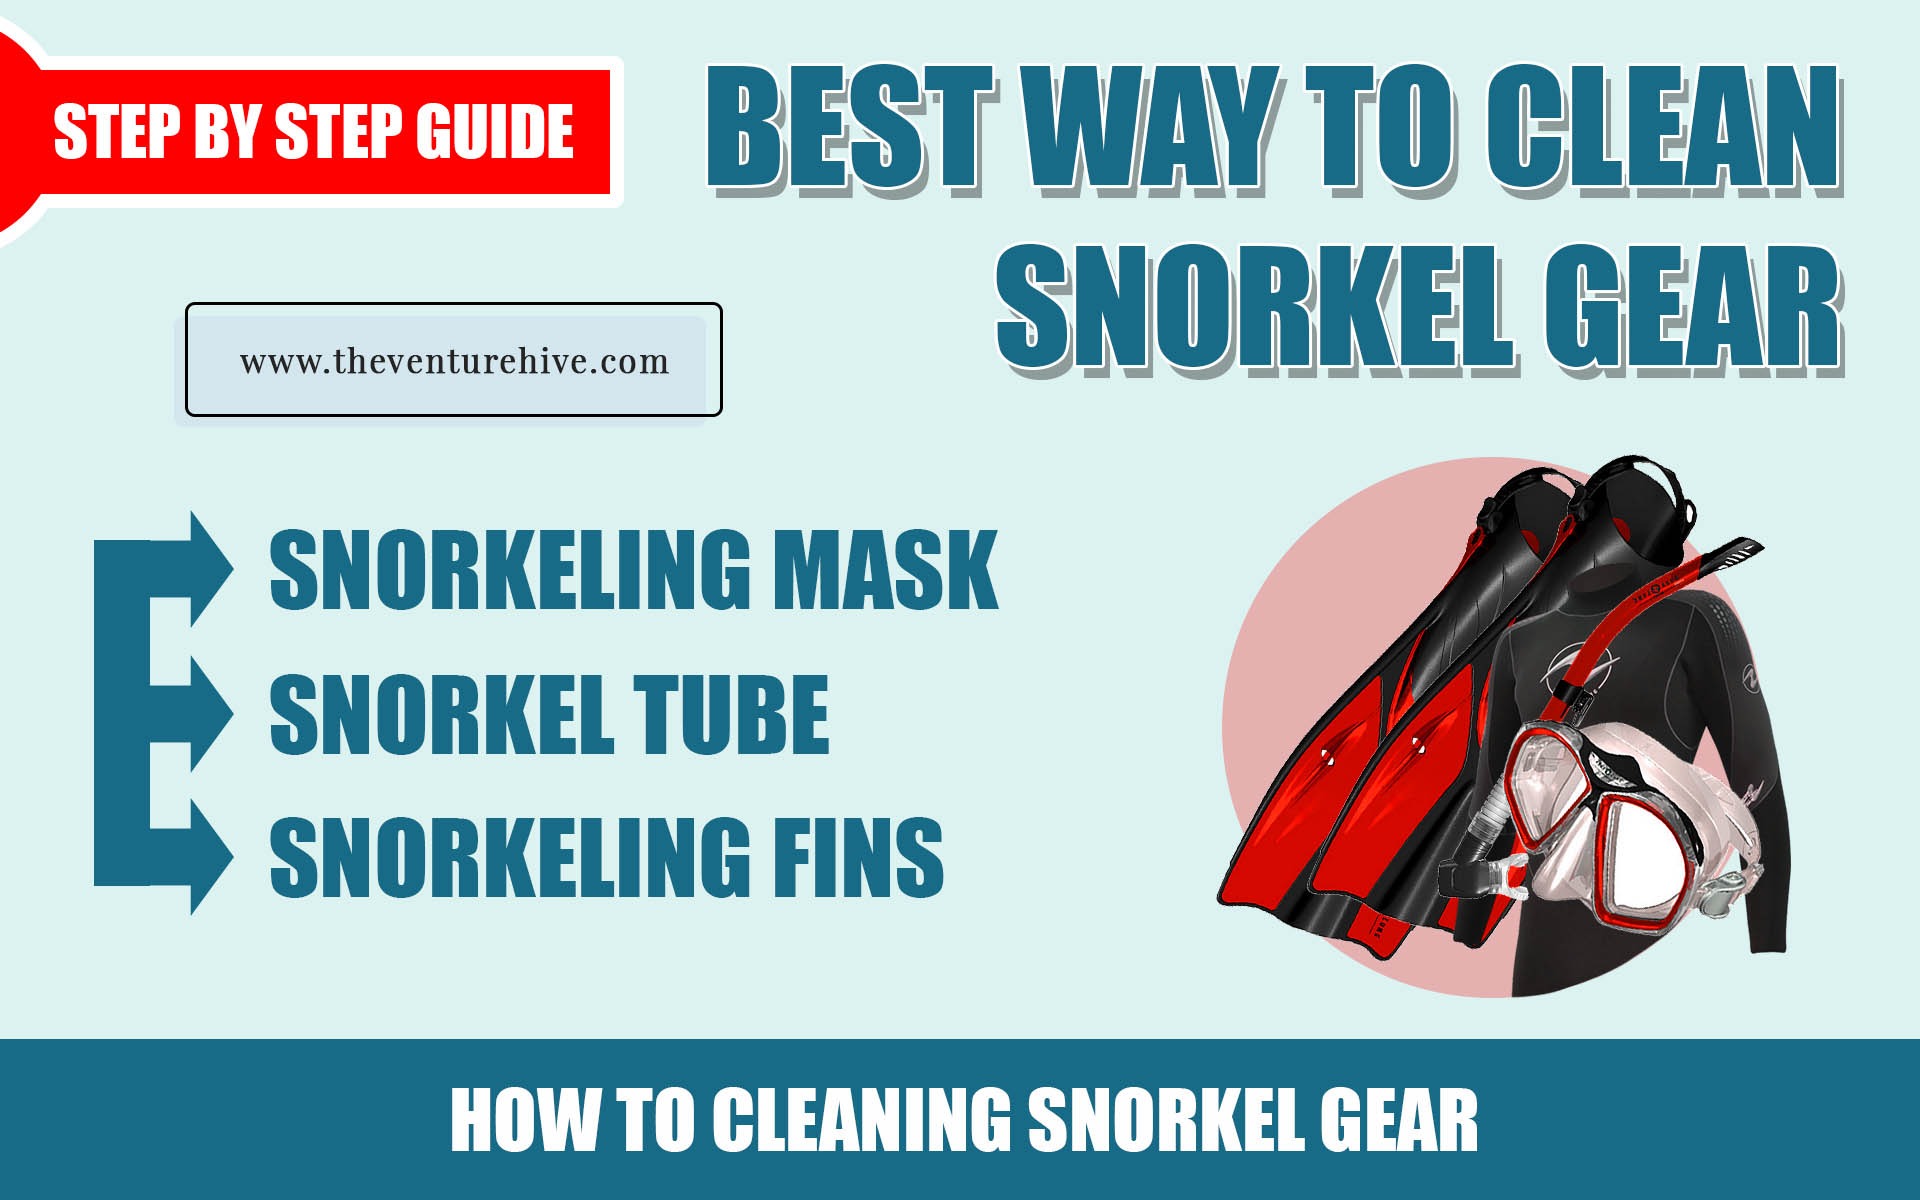 Cleaning Snorkel Gear Expert Tips for Cleaning and Storing Your Snorkel Gear Properly 6